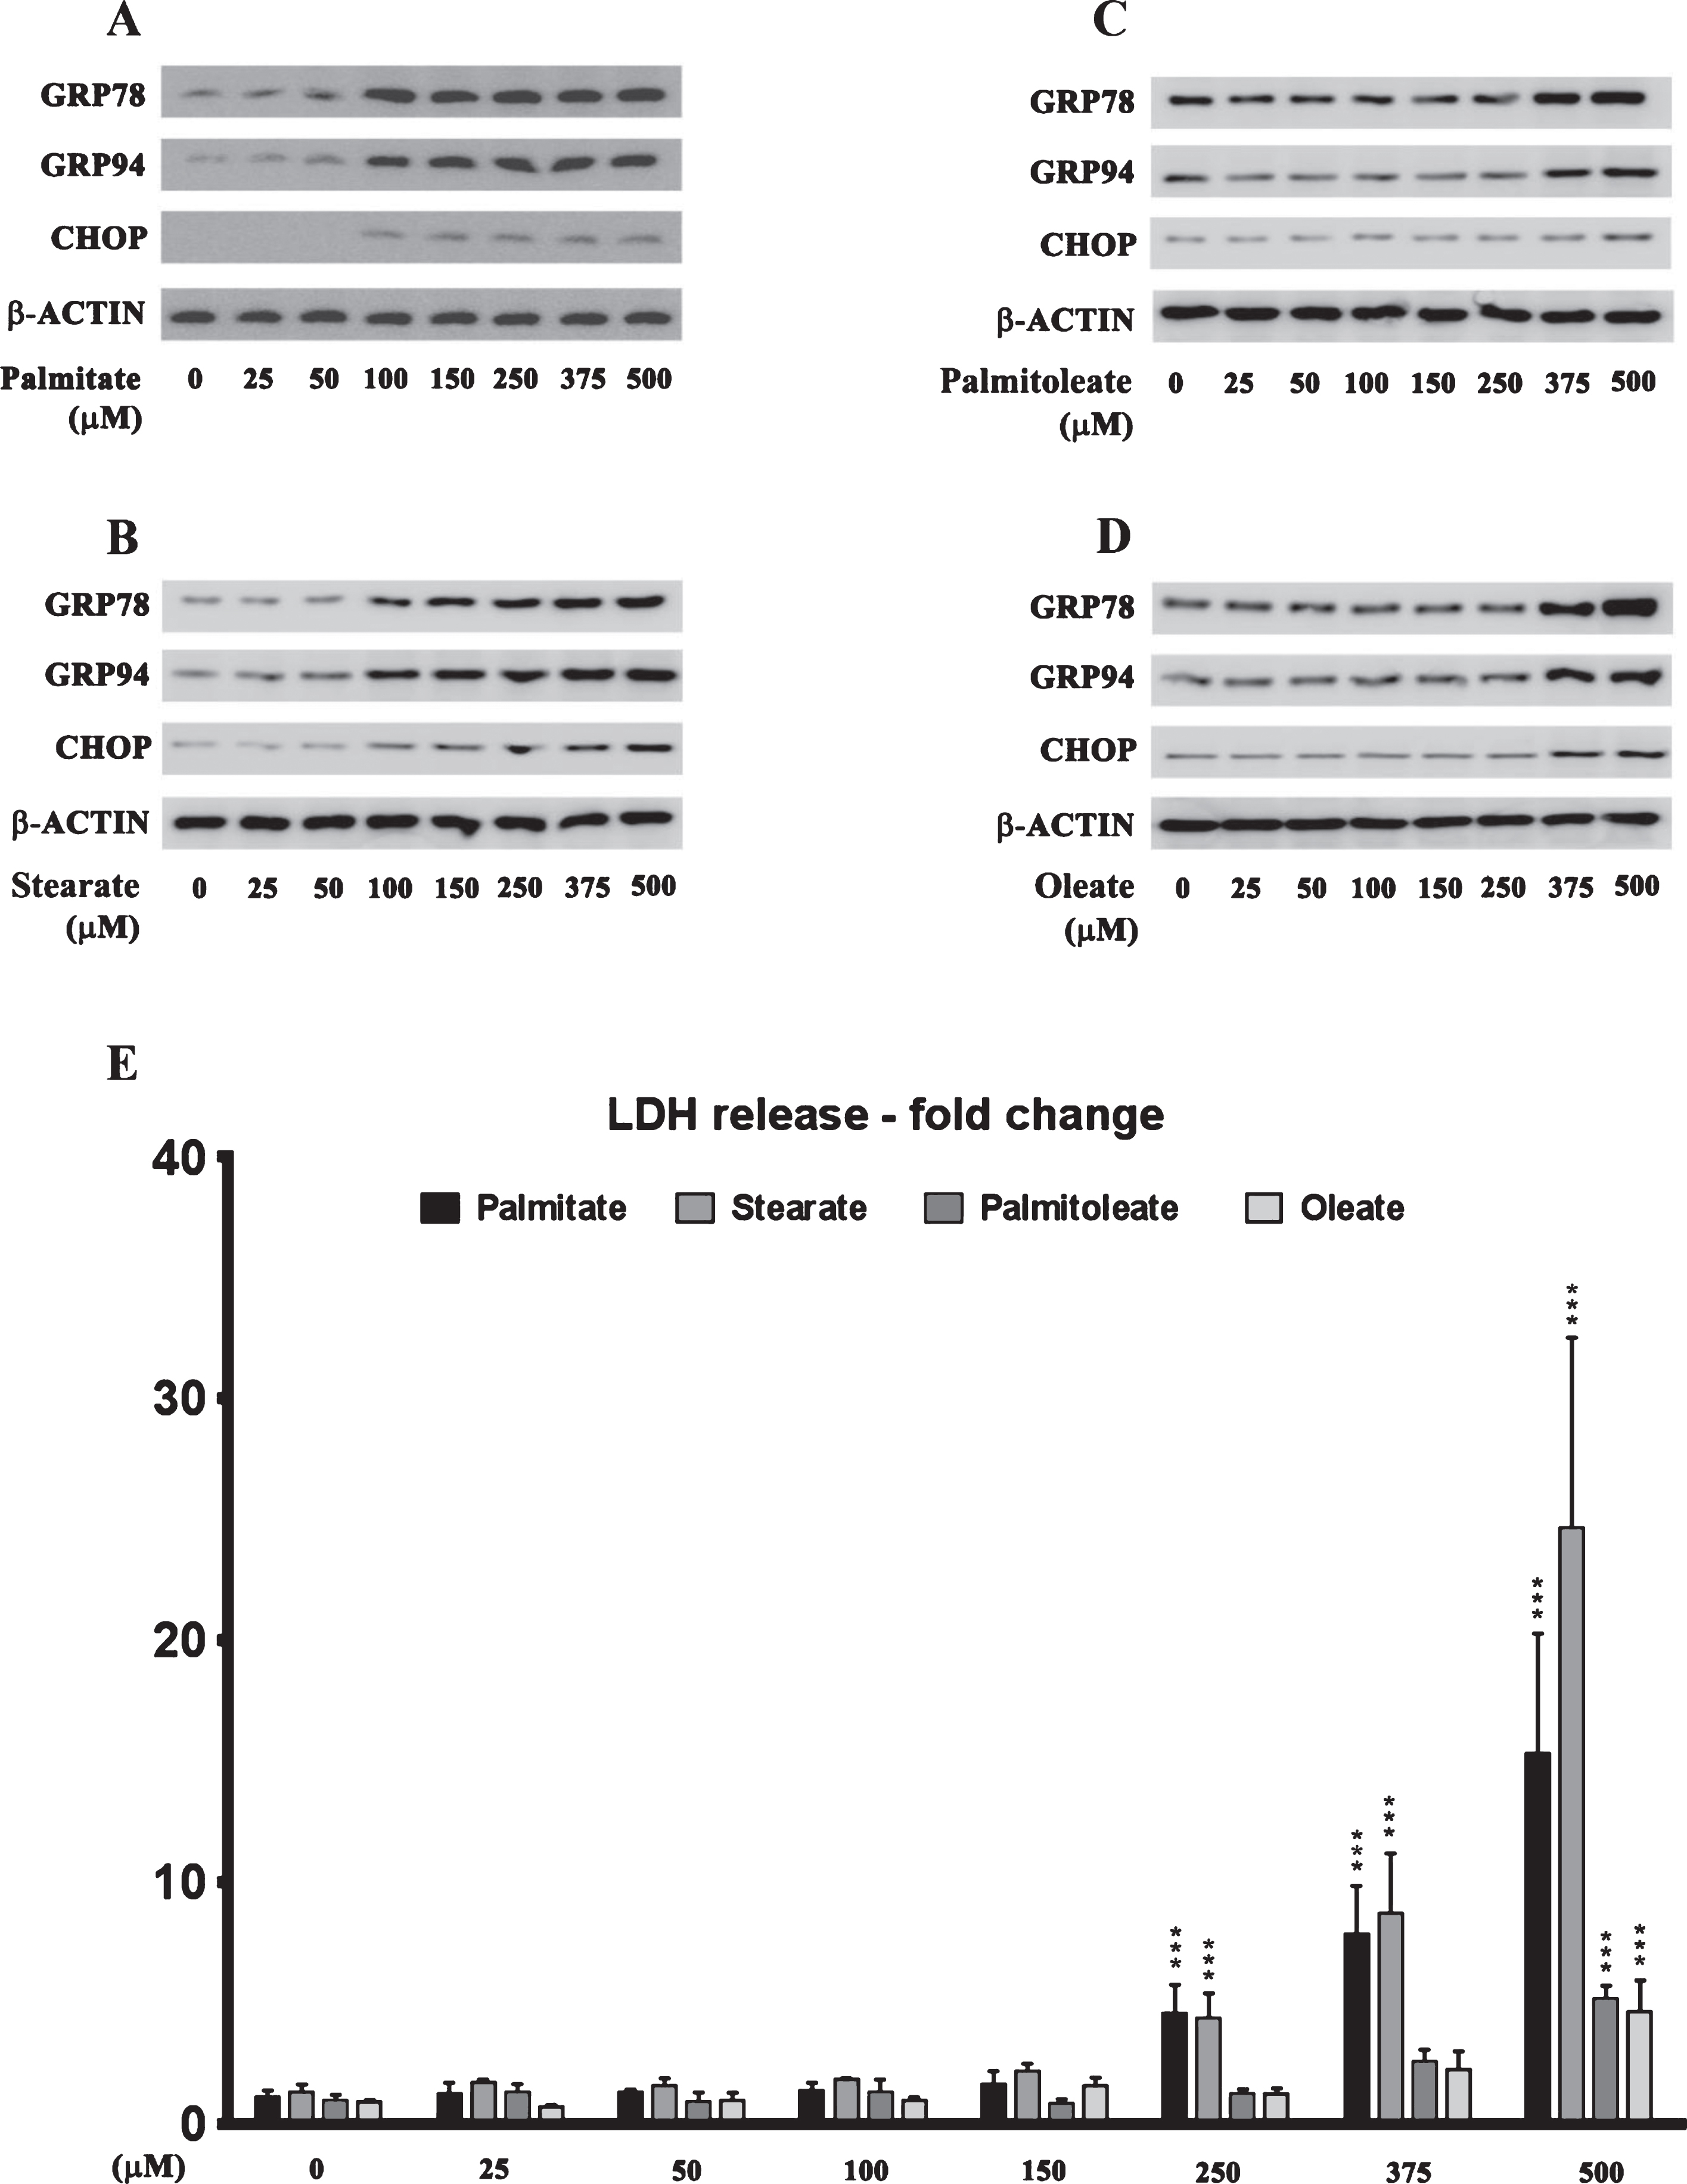 Dose response effects of the saturated fatty acids, palmitate and stearate, and their respective MUFA, palmitoleate and oleate, on the expression of ER stress markers and cell death in human neuroblastoma SH-SY5Y cells. A-D) Representative western blots show that treatment with exogenous palmitate (A) and stearate (B) at a concentration >100 μM for 24 h, while treatment with exogenous palmitoleate (C) and oleate (D) only at a concentration of >375 μM for 24 h, significantly increases the expression of ER stress markers - GRP78, GRP94, and CHOP in whole cell lysates from SH-SY5Y-APPSwe cells. E) Cell death assessed by the release of LDH in the conditioned medium shows that treatment with exogenous palmitate and stearate at a concentration >250 μM for 24 h, while treatment with exogenous palmitoleate and oleate only at a concentration of 500 μM for 24 h, evoked significant cell death in SH-SY5Y-APPSwe cells. Data is expressed as Mean±S.D and includes determination made in four (n = 4) separate cell culture experiments. ***p < 0.001 versus BSA-treated cells.